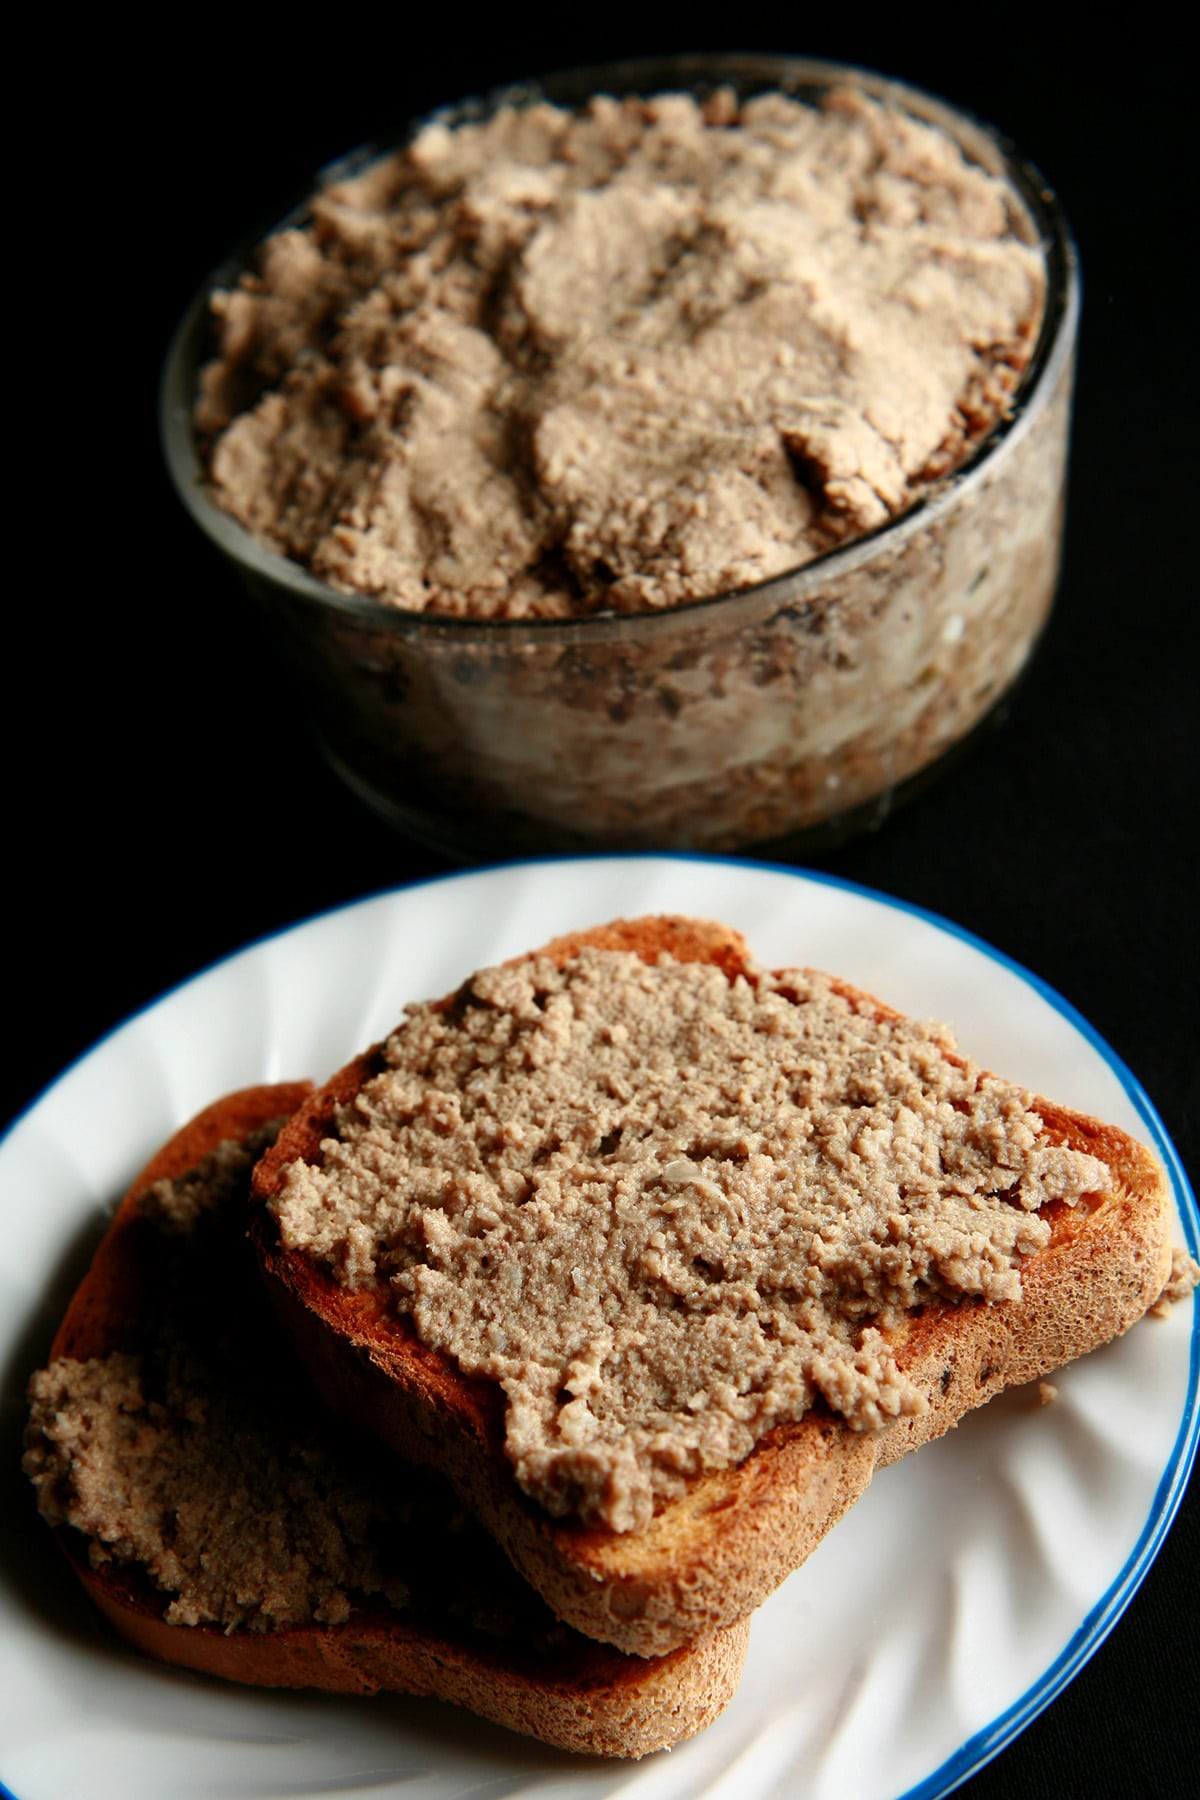 A slice of toast spread with cretons, on a small white plate.  There is a glass dish packed with cretons next to it.